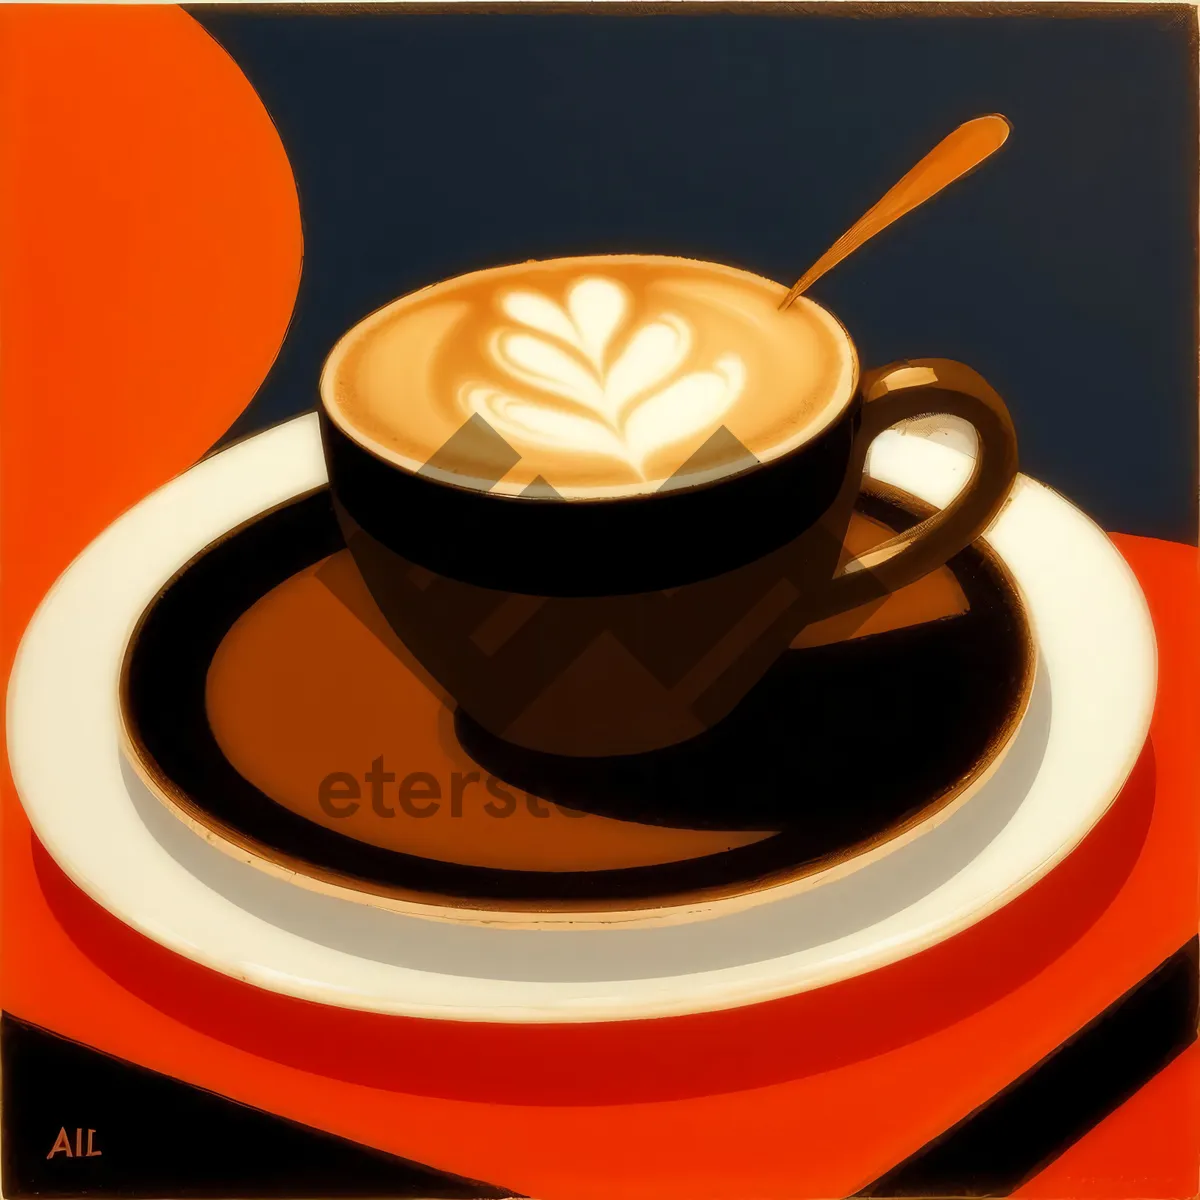 Picture of Morning Cup of Joe: A Hot Espresso Beverage on Saucer